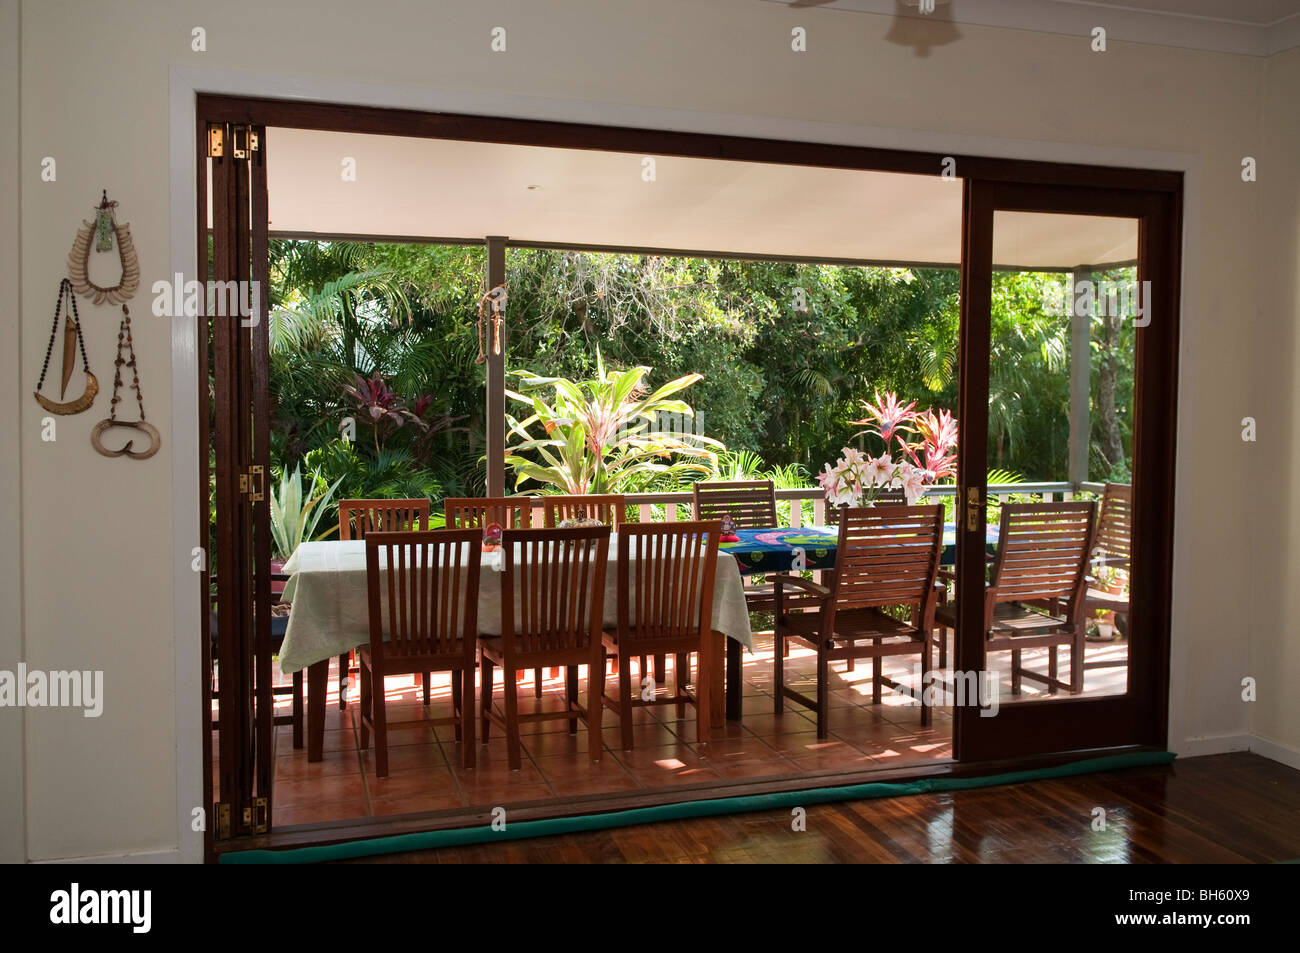 Looking From Inside Out To The Verandah And Garden Of A Private